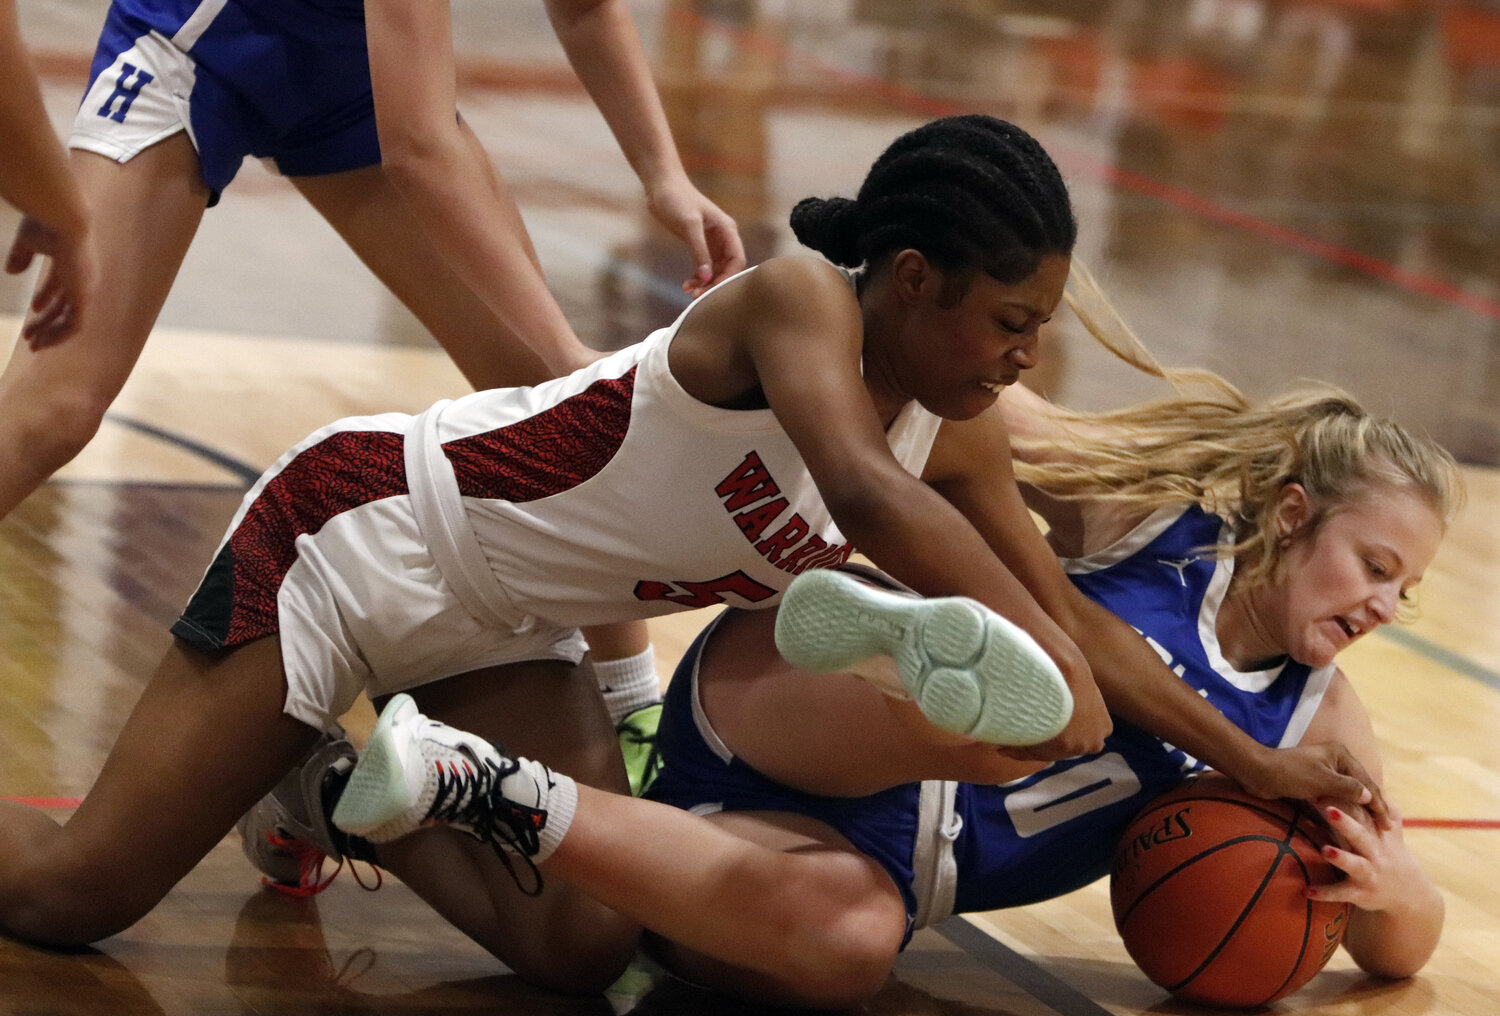 Warrenton guard Nyasia Love dives for the ball during the first half of Warrenton’s win over Hermann last week.